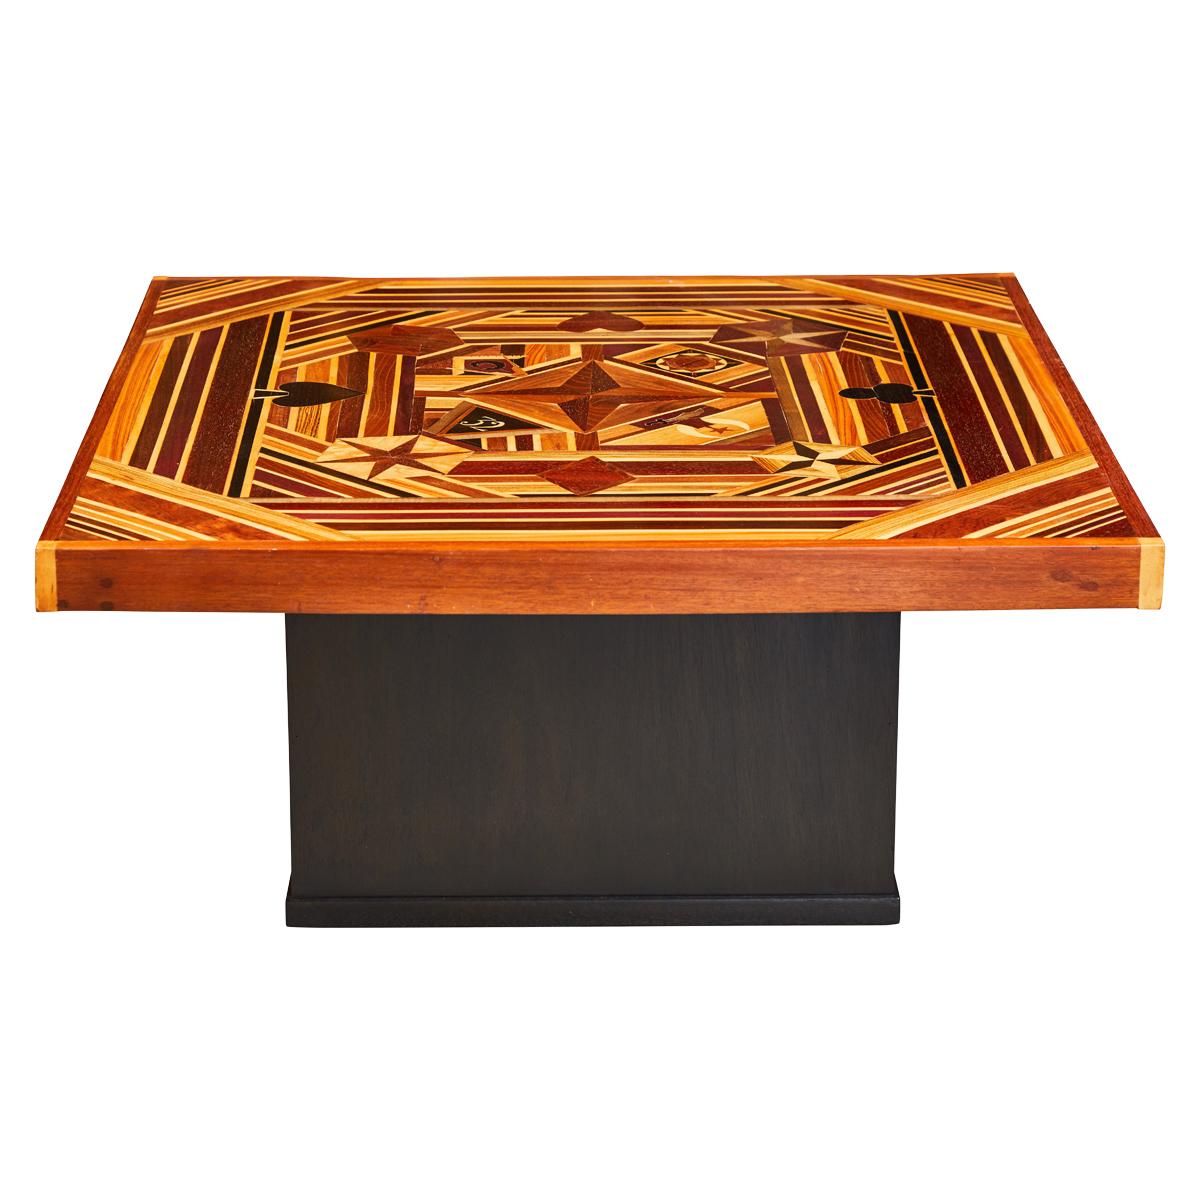 Vintage Marquetry Folk Art Coffee or Game Table with Masonic Symbols